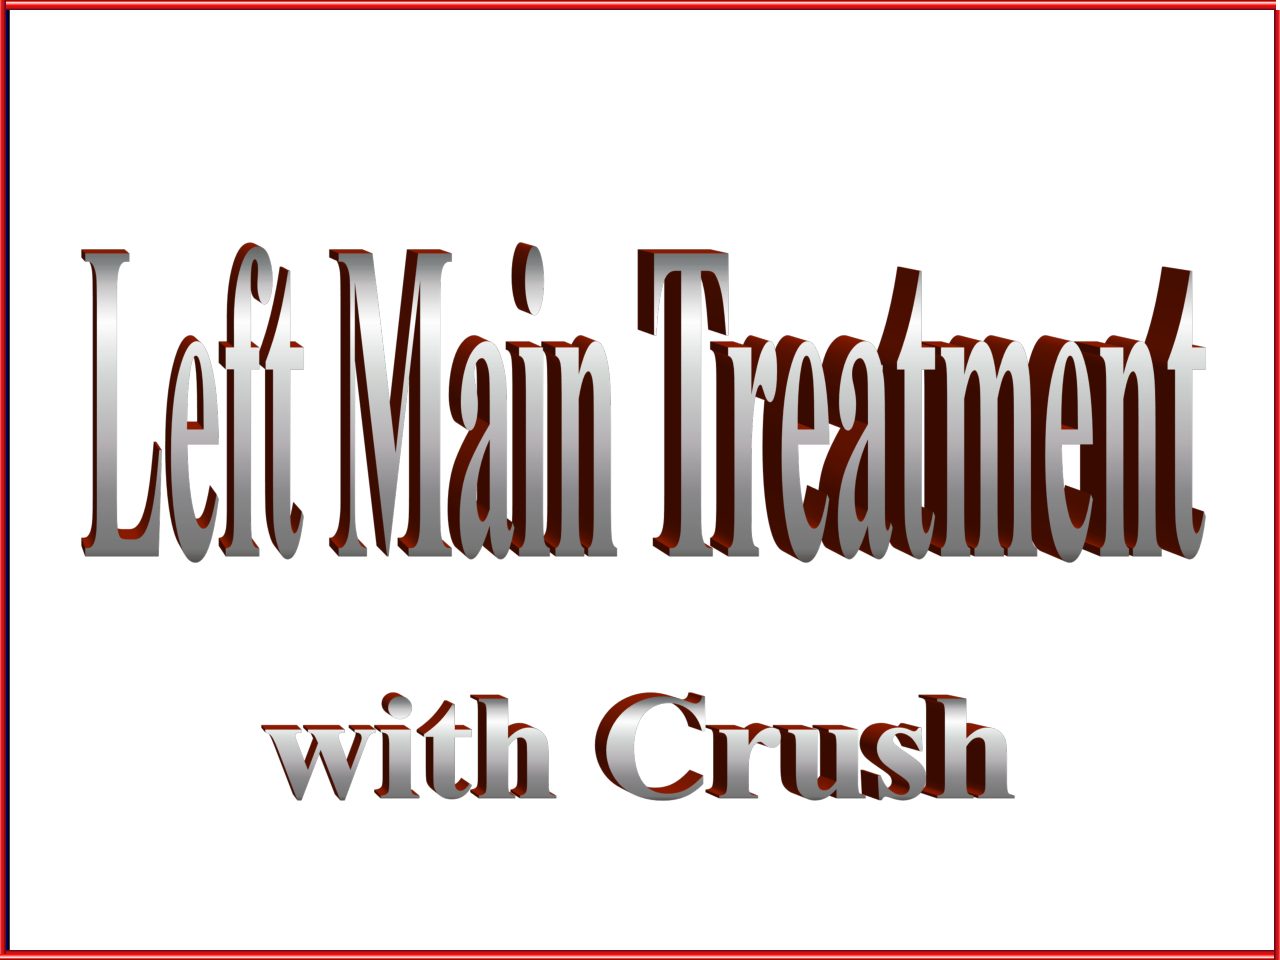 You are currently viewing Left main treatment with crush